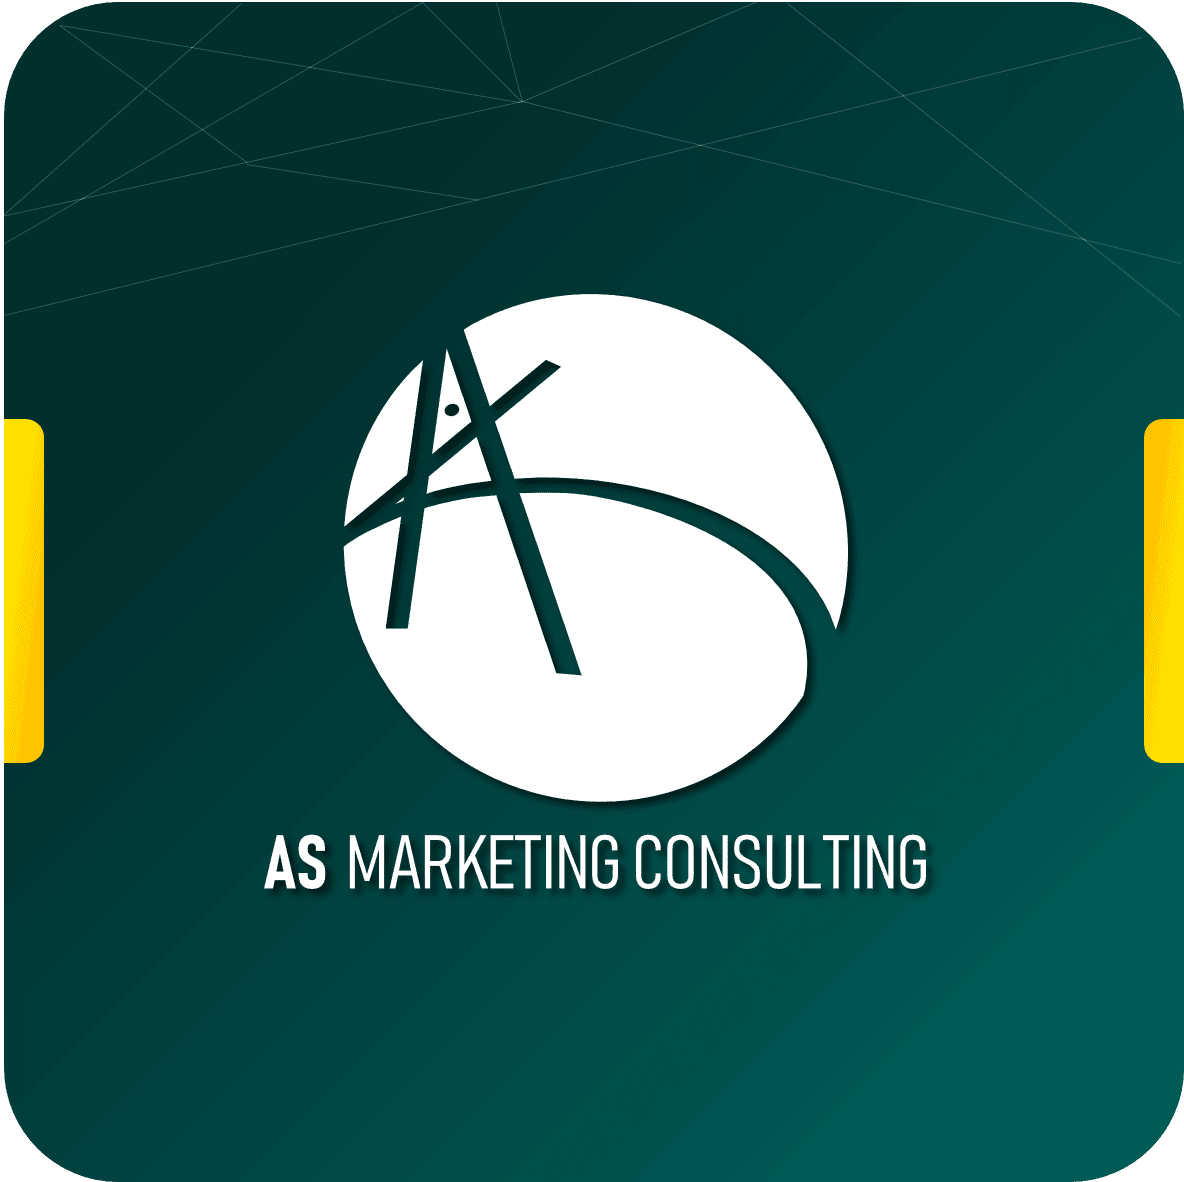 As Marketing Consulting